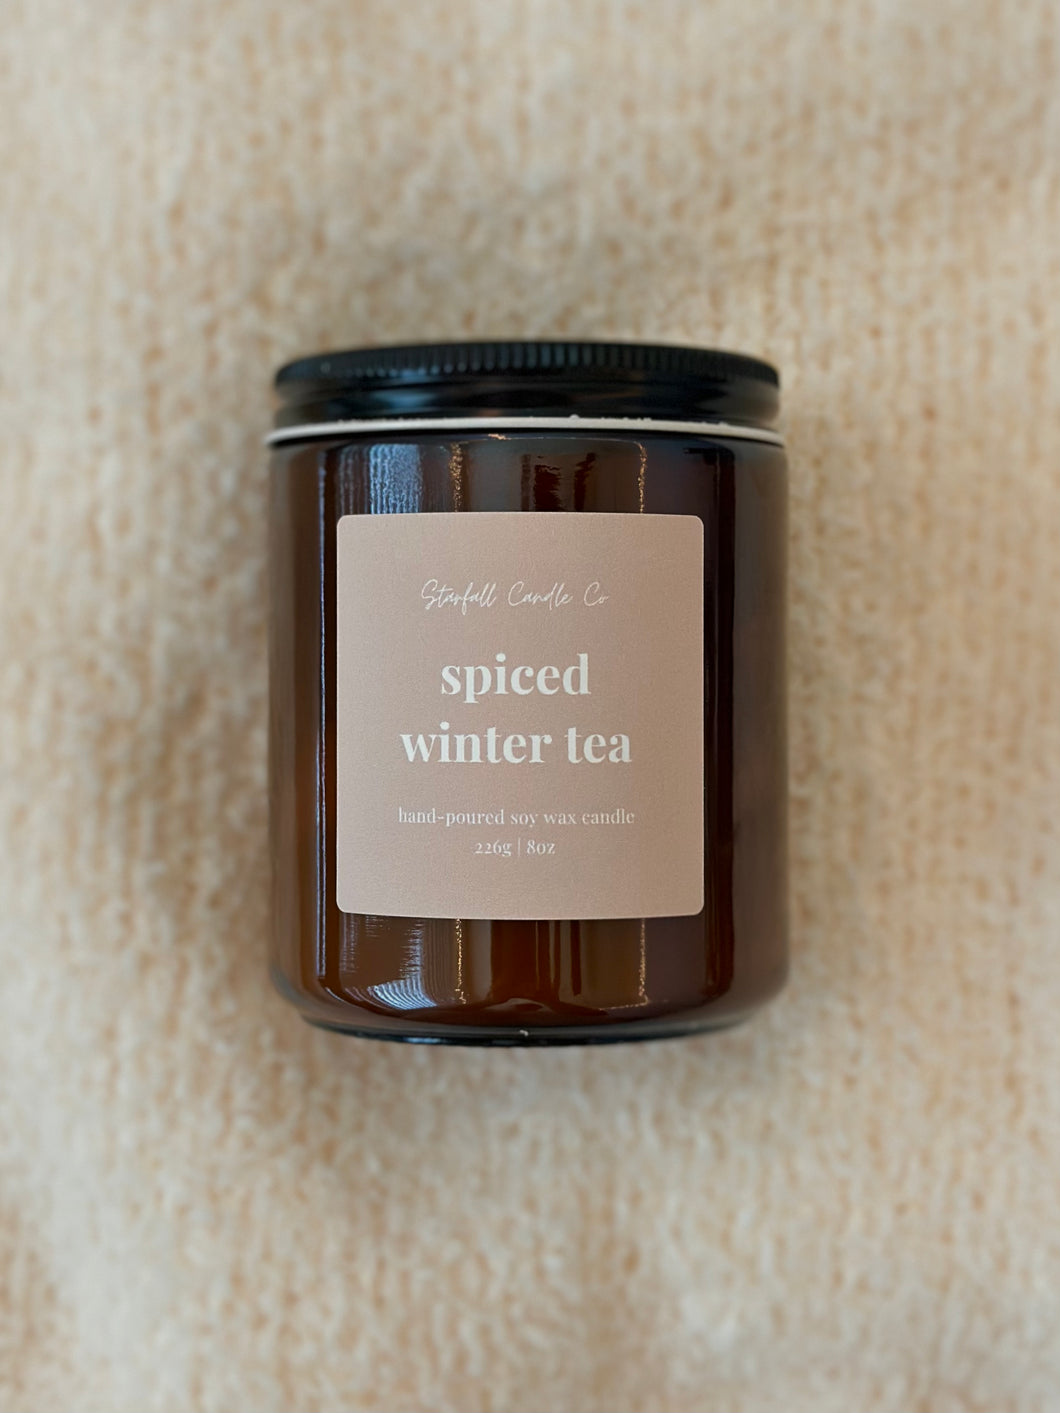 Spiced Winter Tea Soy Wax Candle